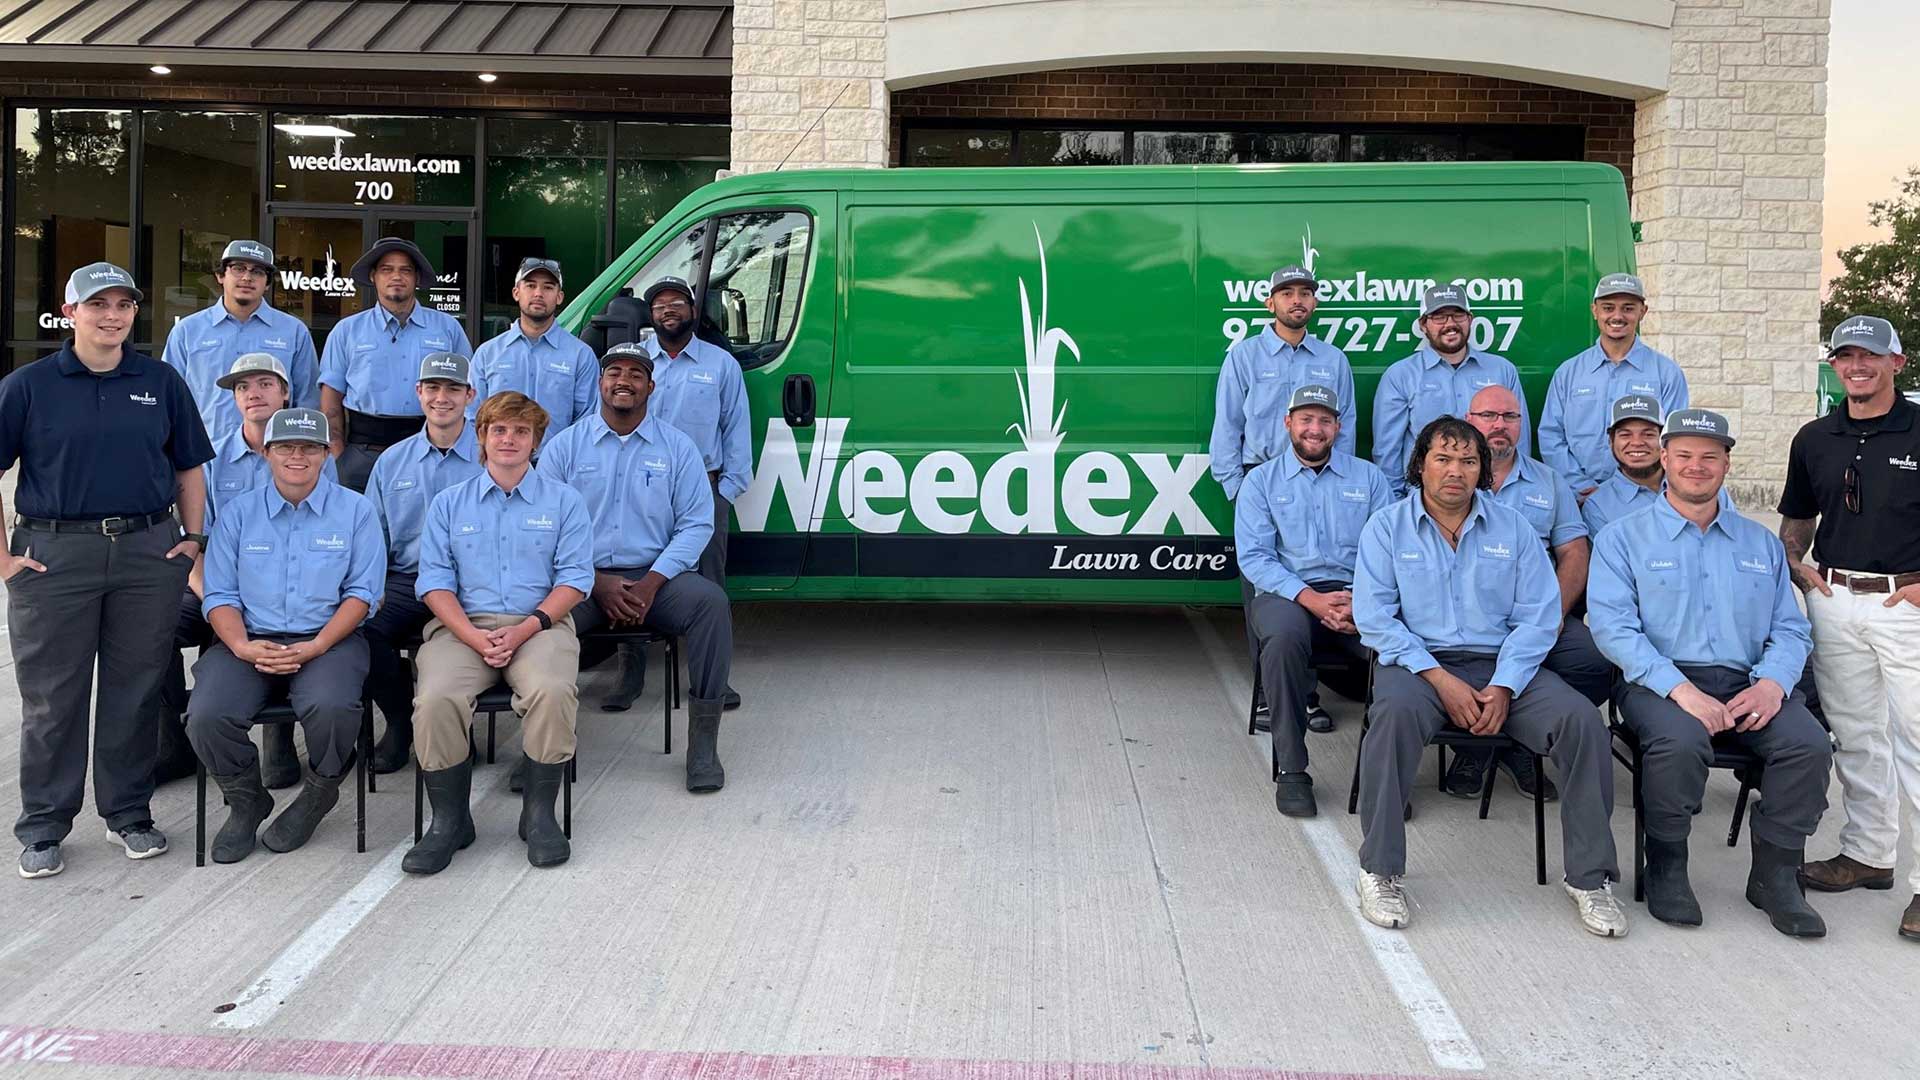 Weedex Lawn Care team in front of the Weedex office in Lewisville, Texas.